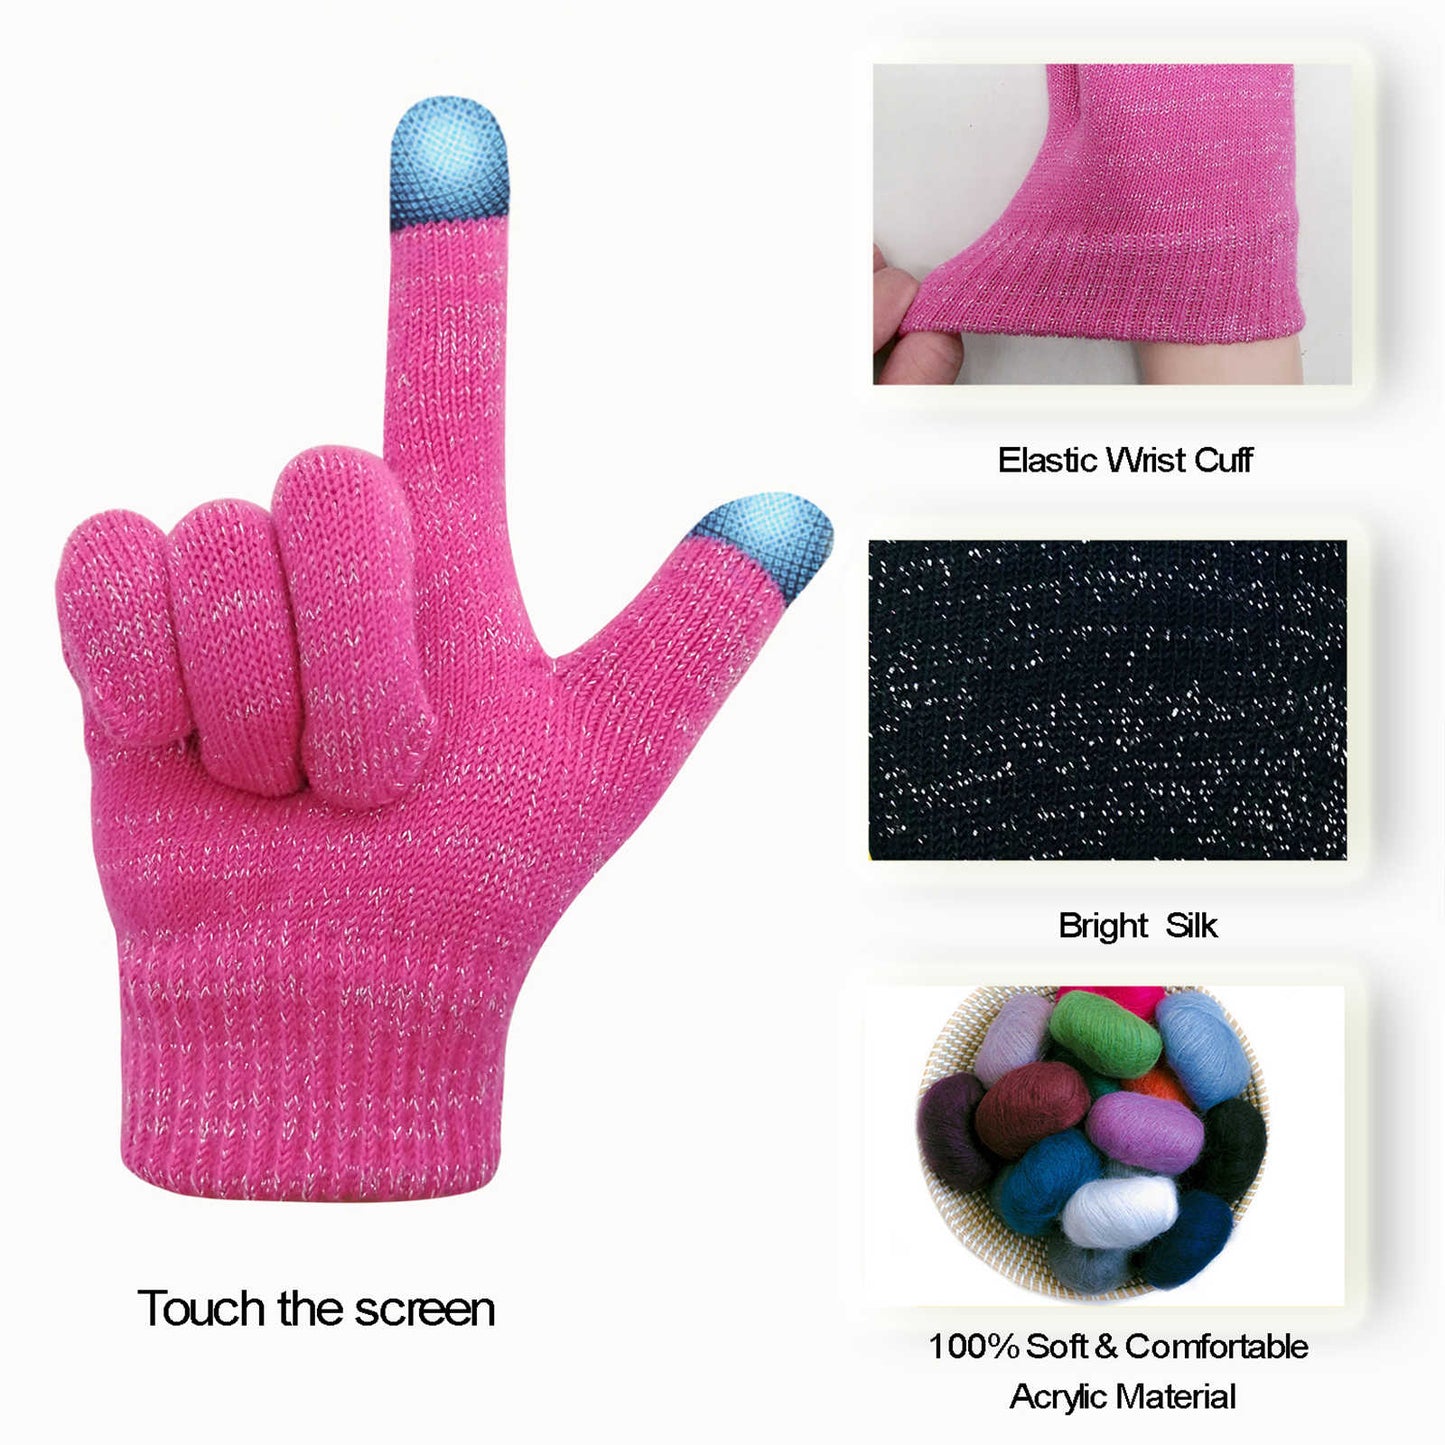 EvridWear 3 Pairs Boy Girl Knit Warm Touchscreen Gloves, Fall Winter Cold Weather (2-14 years)